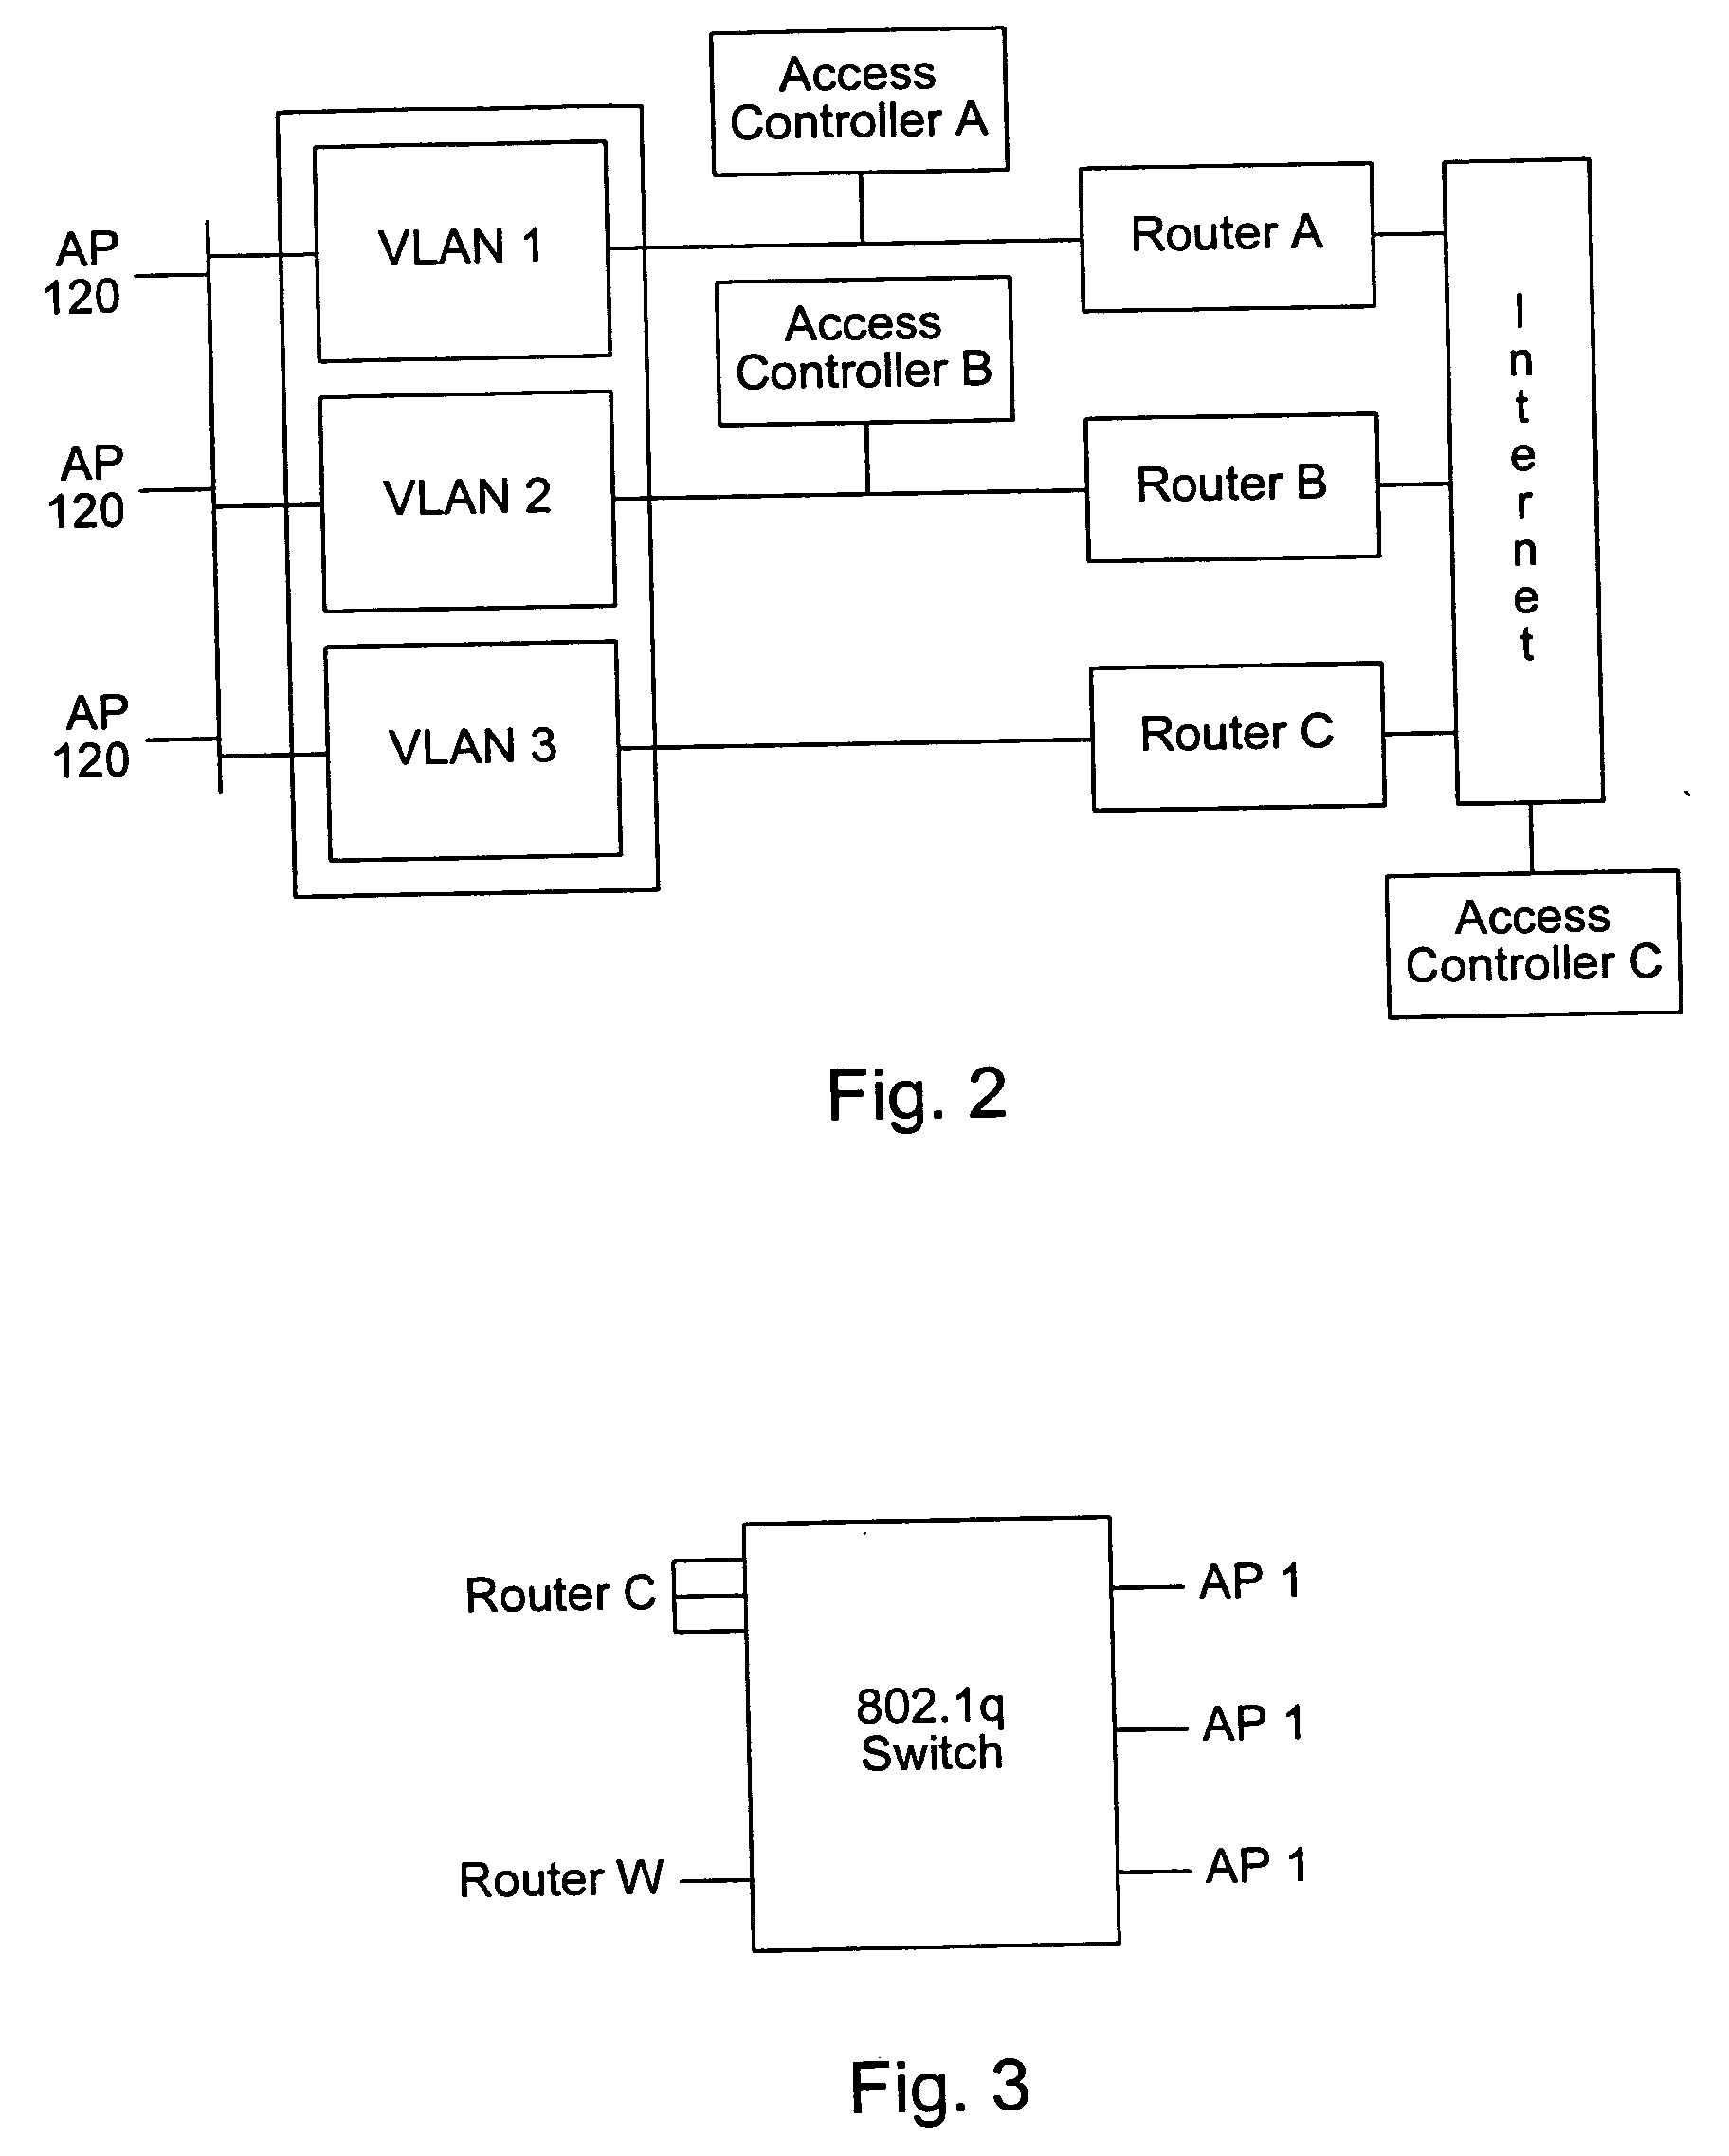 System and method for concurrently utilizing multiple system identifiers